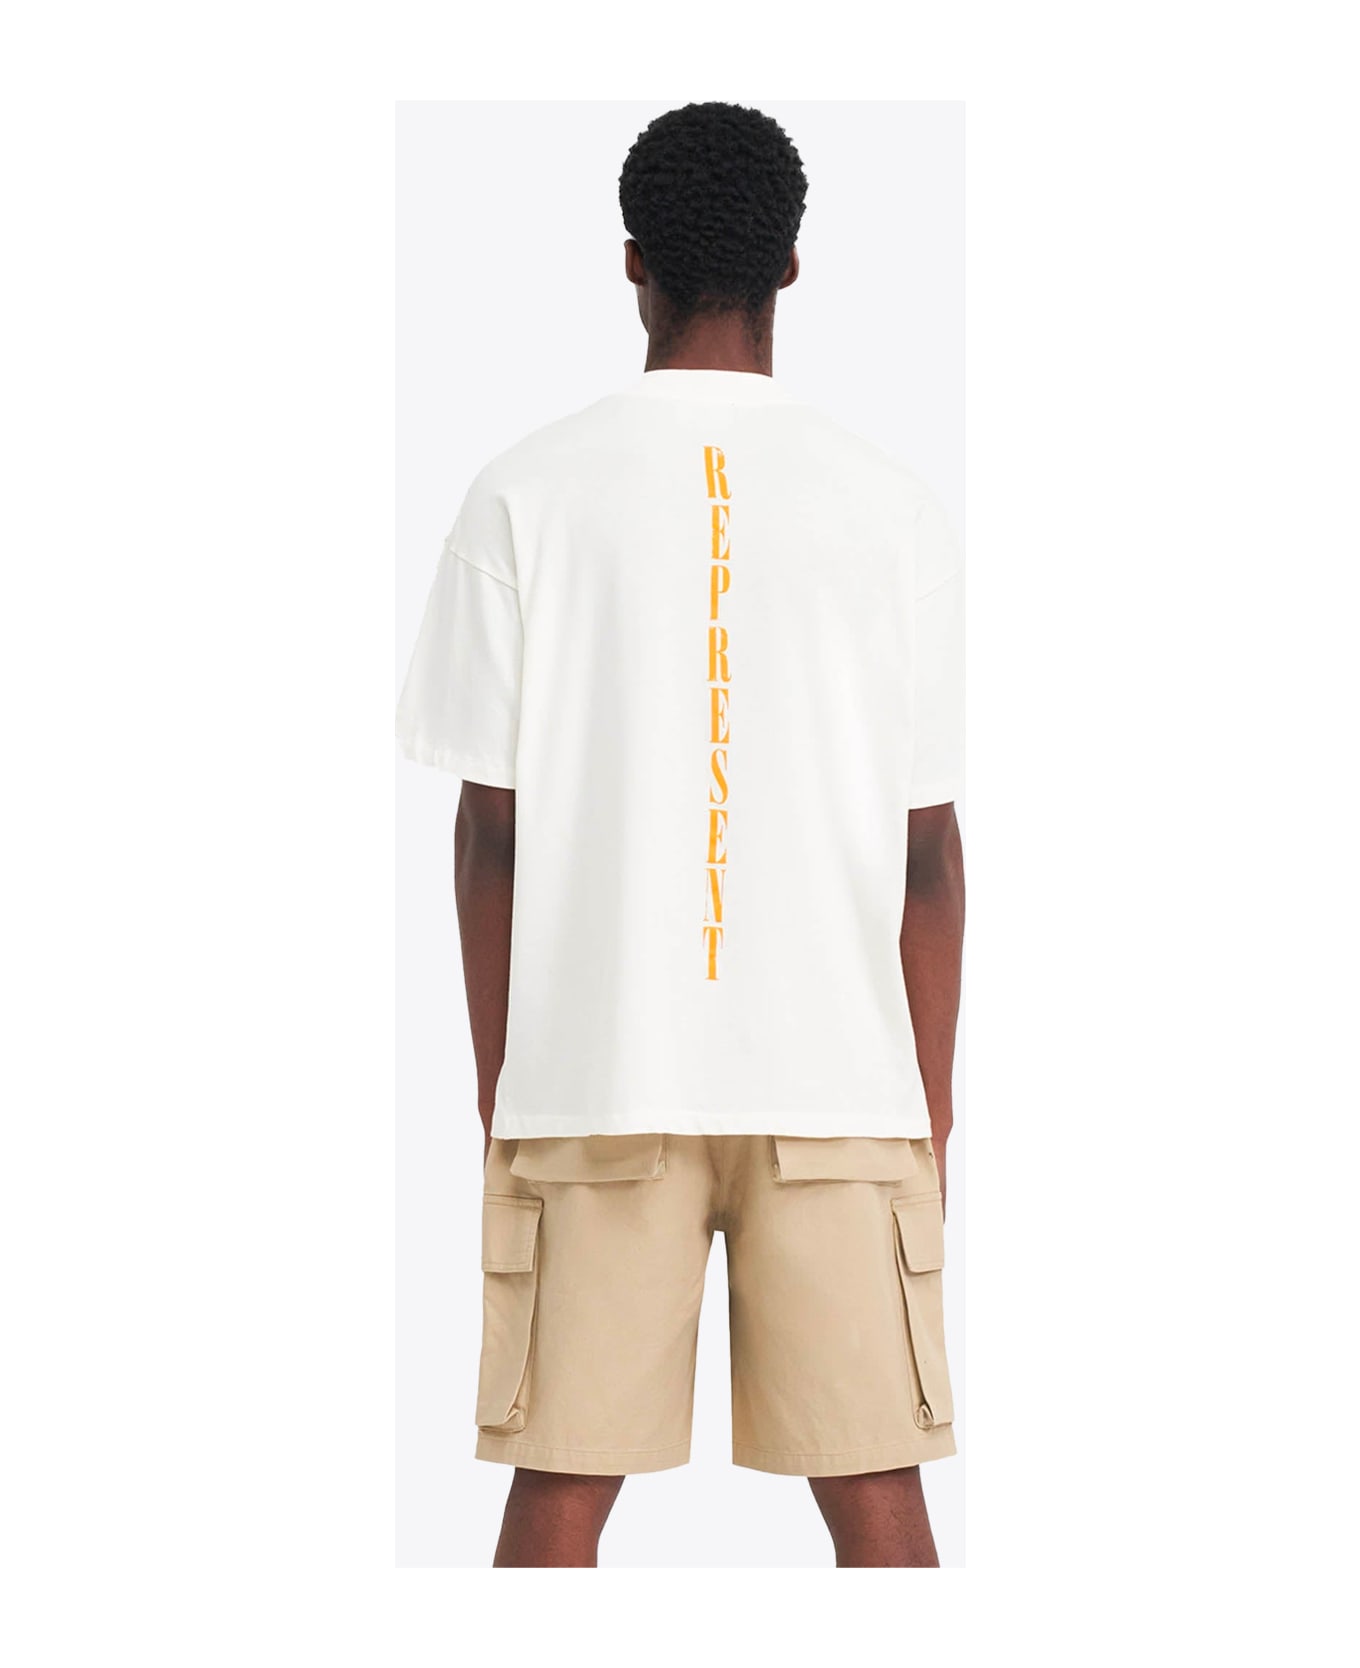 REPRESENT Reborn T-shirt Off white t-shirt with graphic print and logo - Reborn T-Shirt - Bianco